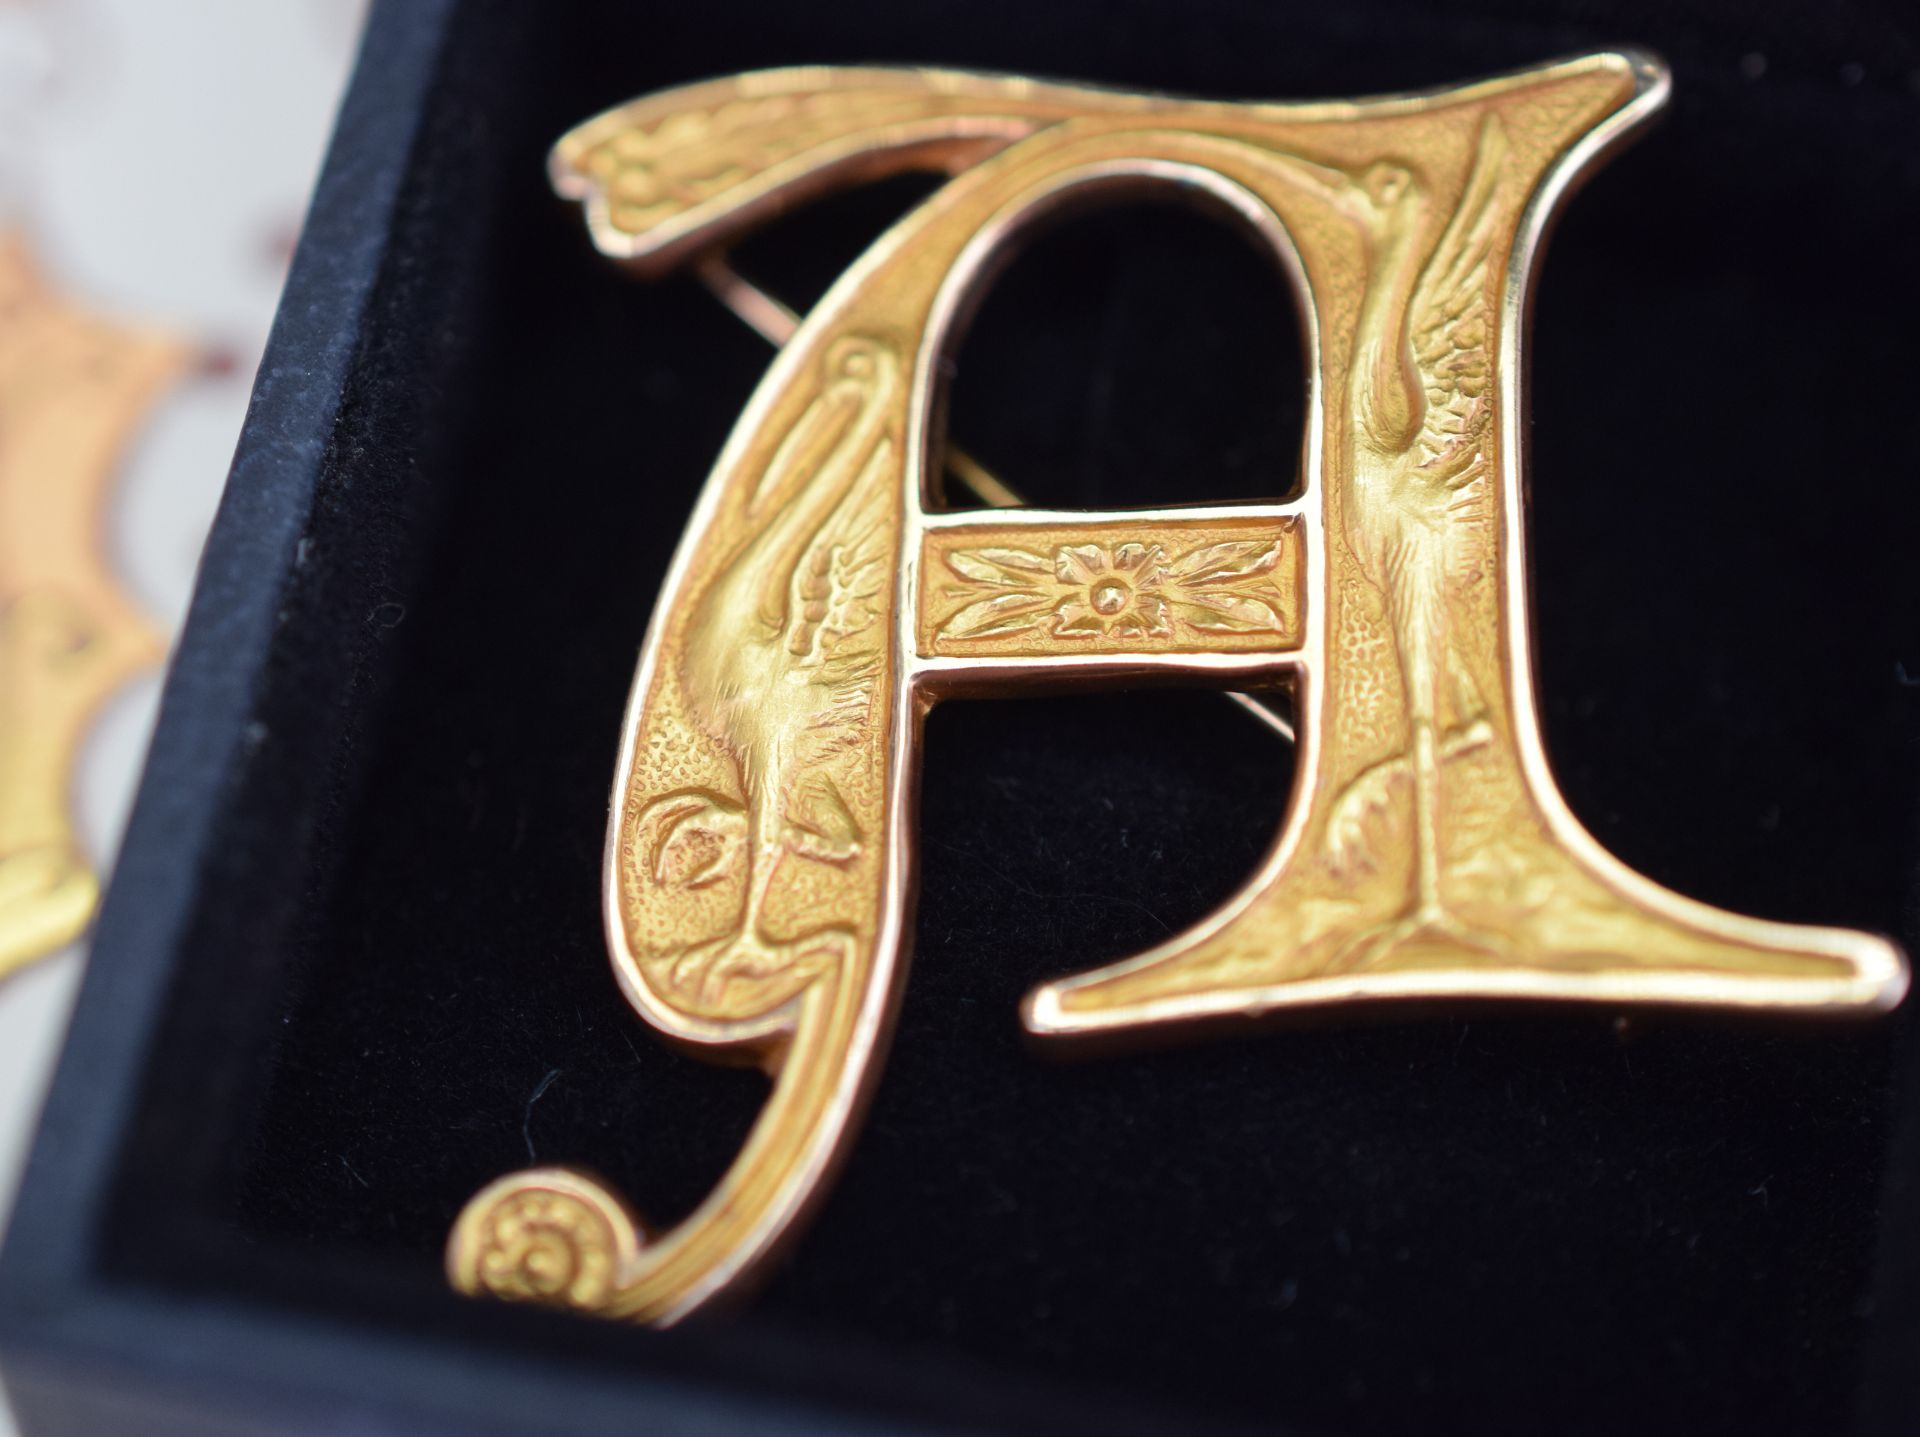 18ct Yellow Gold Lady's Brooch 'A' Initial 4grms - Image 3 of 4